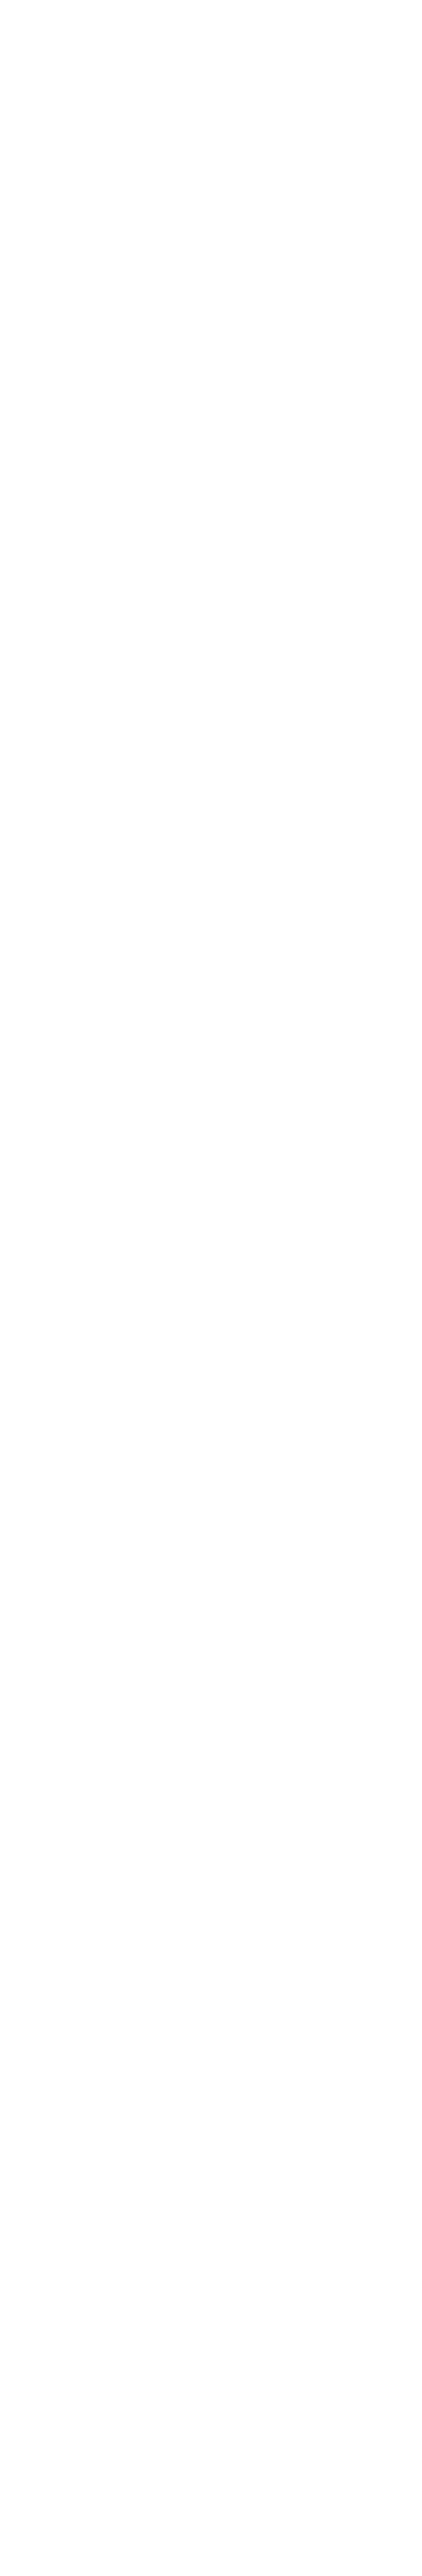 Voodoo Rocket, A new church of American Typography, Authentic, Full Custom, Letterpress Print Shop, Greenville, Tennessee